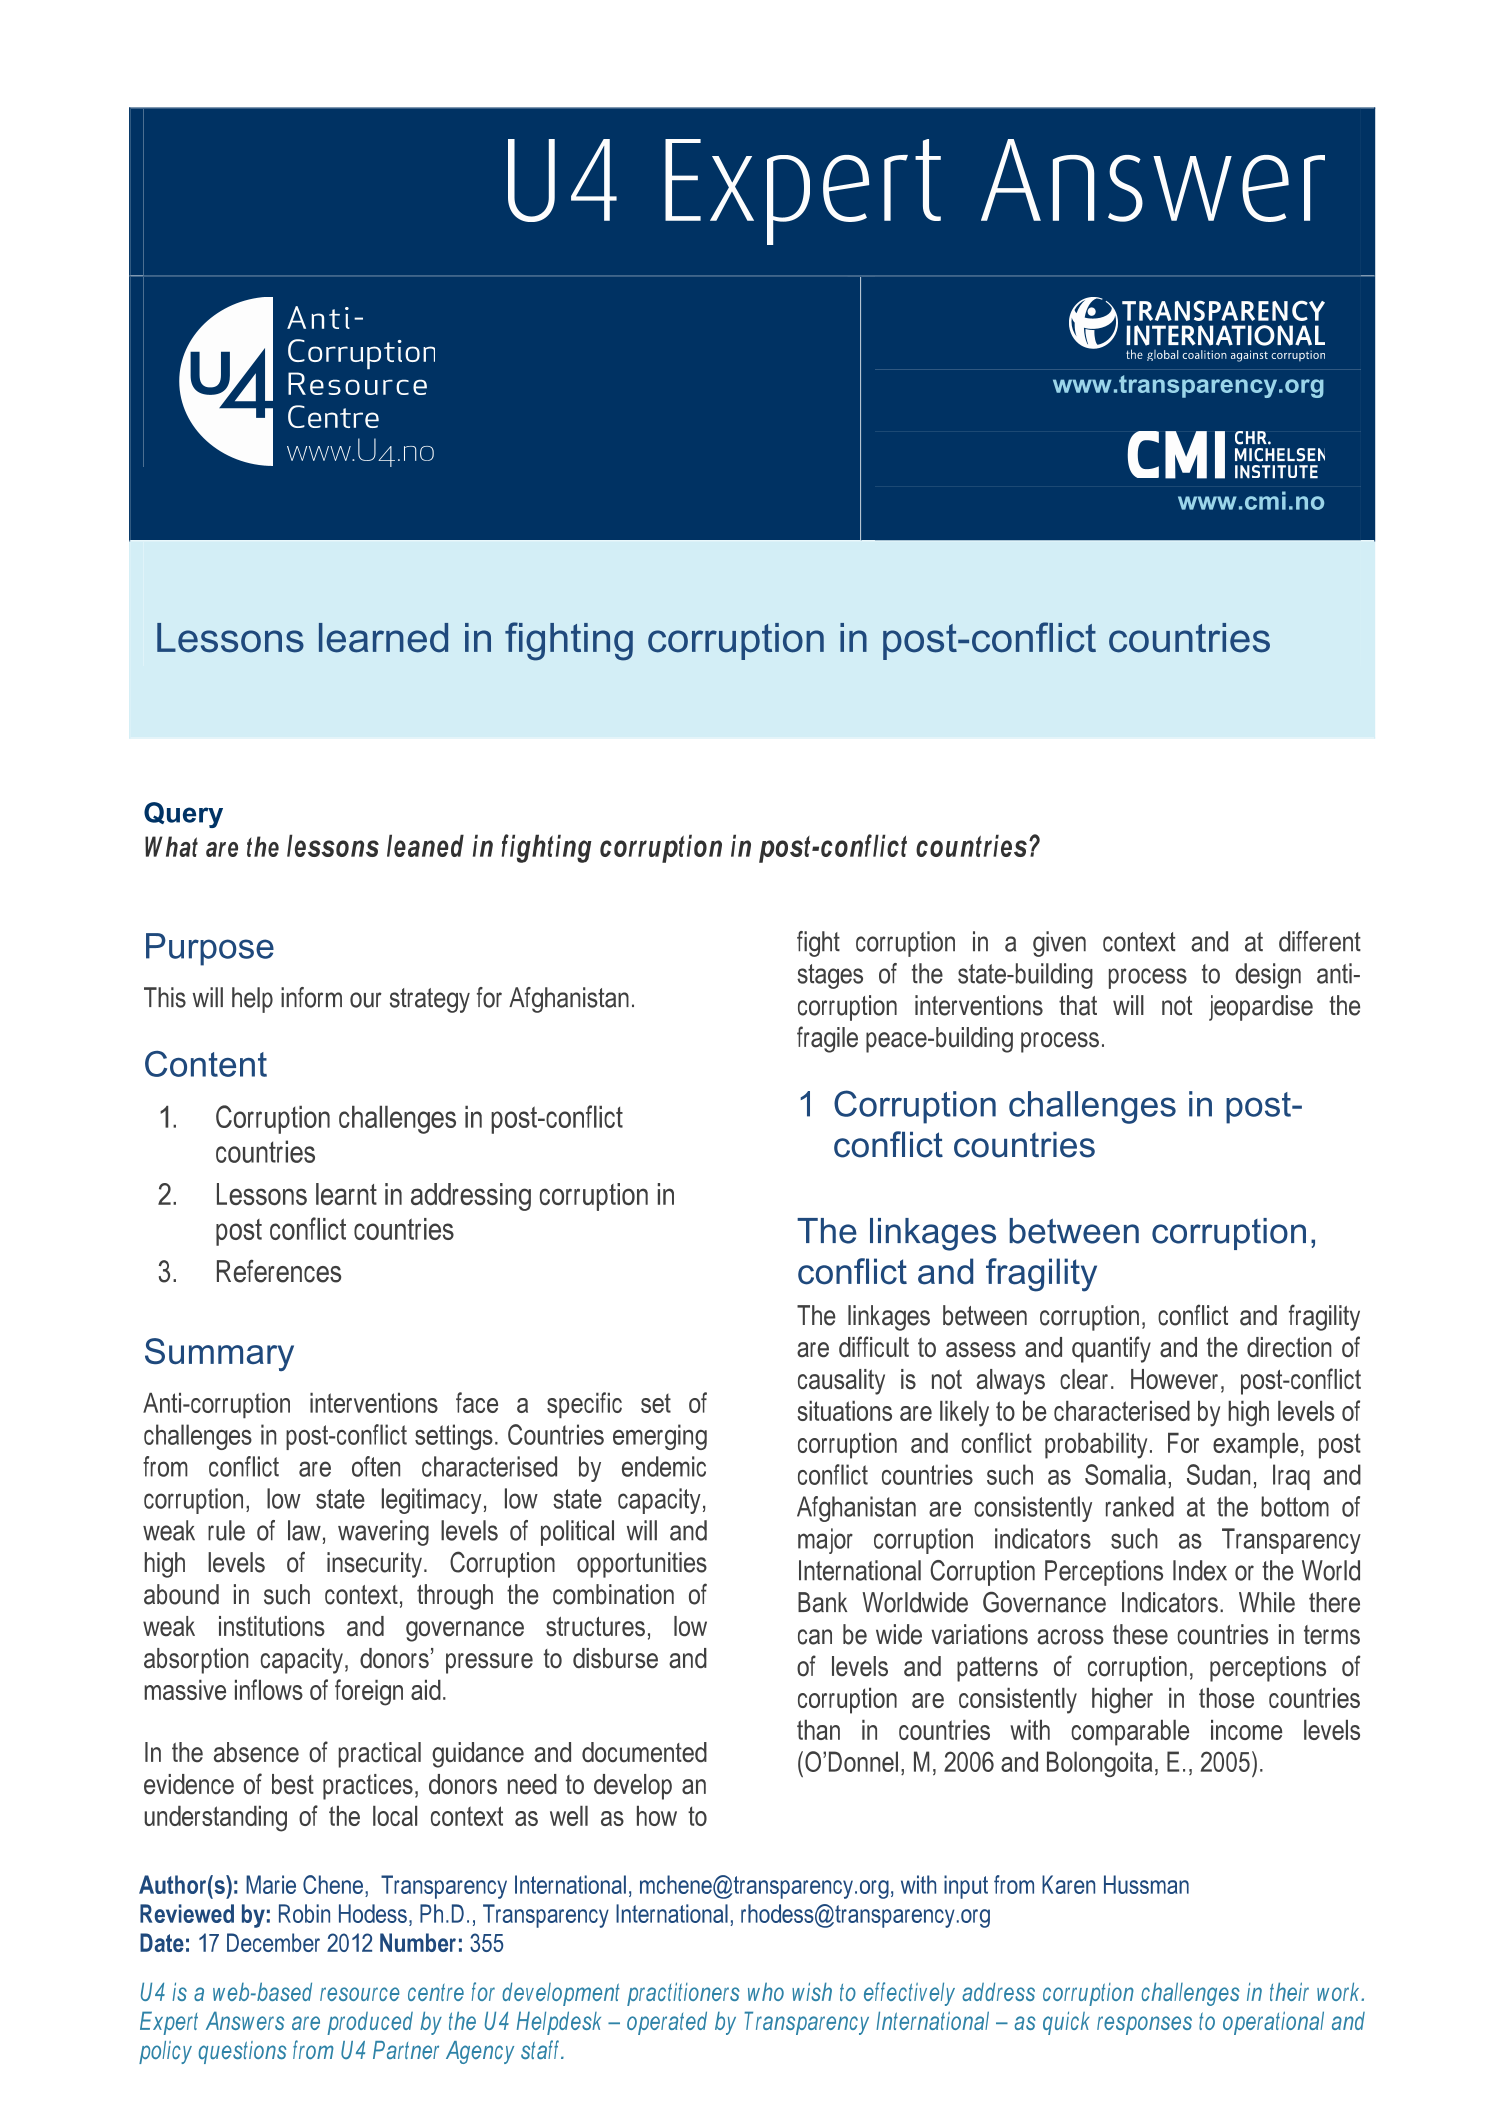 Lessons learned in fighting corruption in post-conflict countries